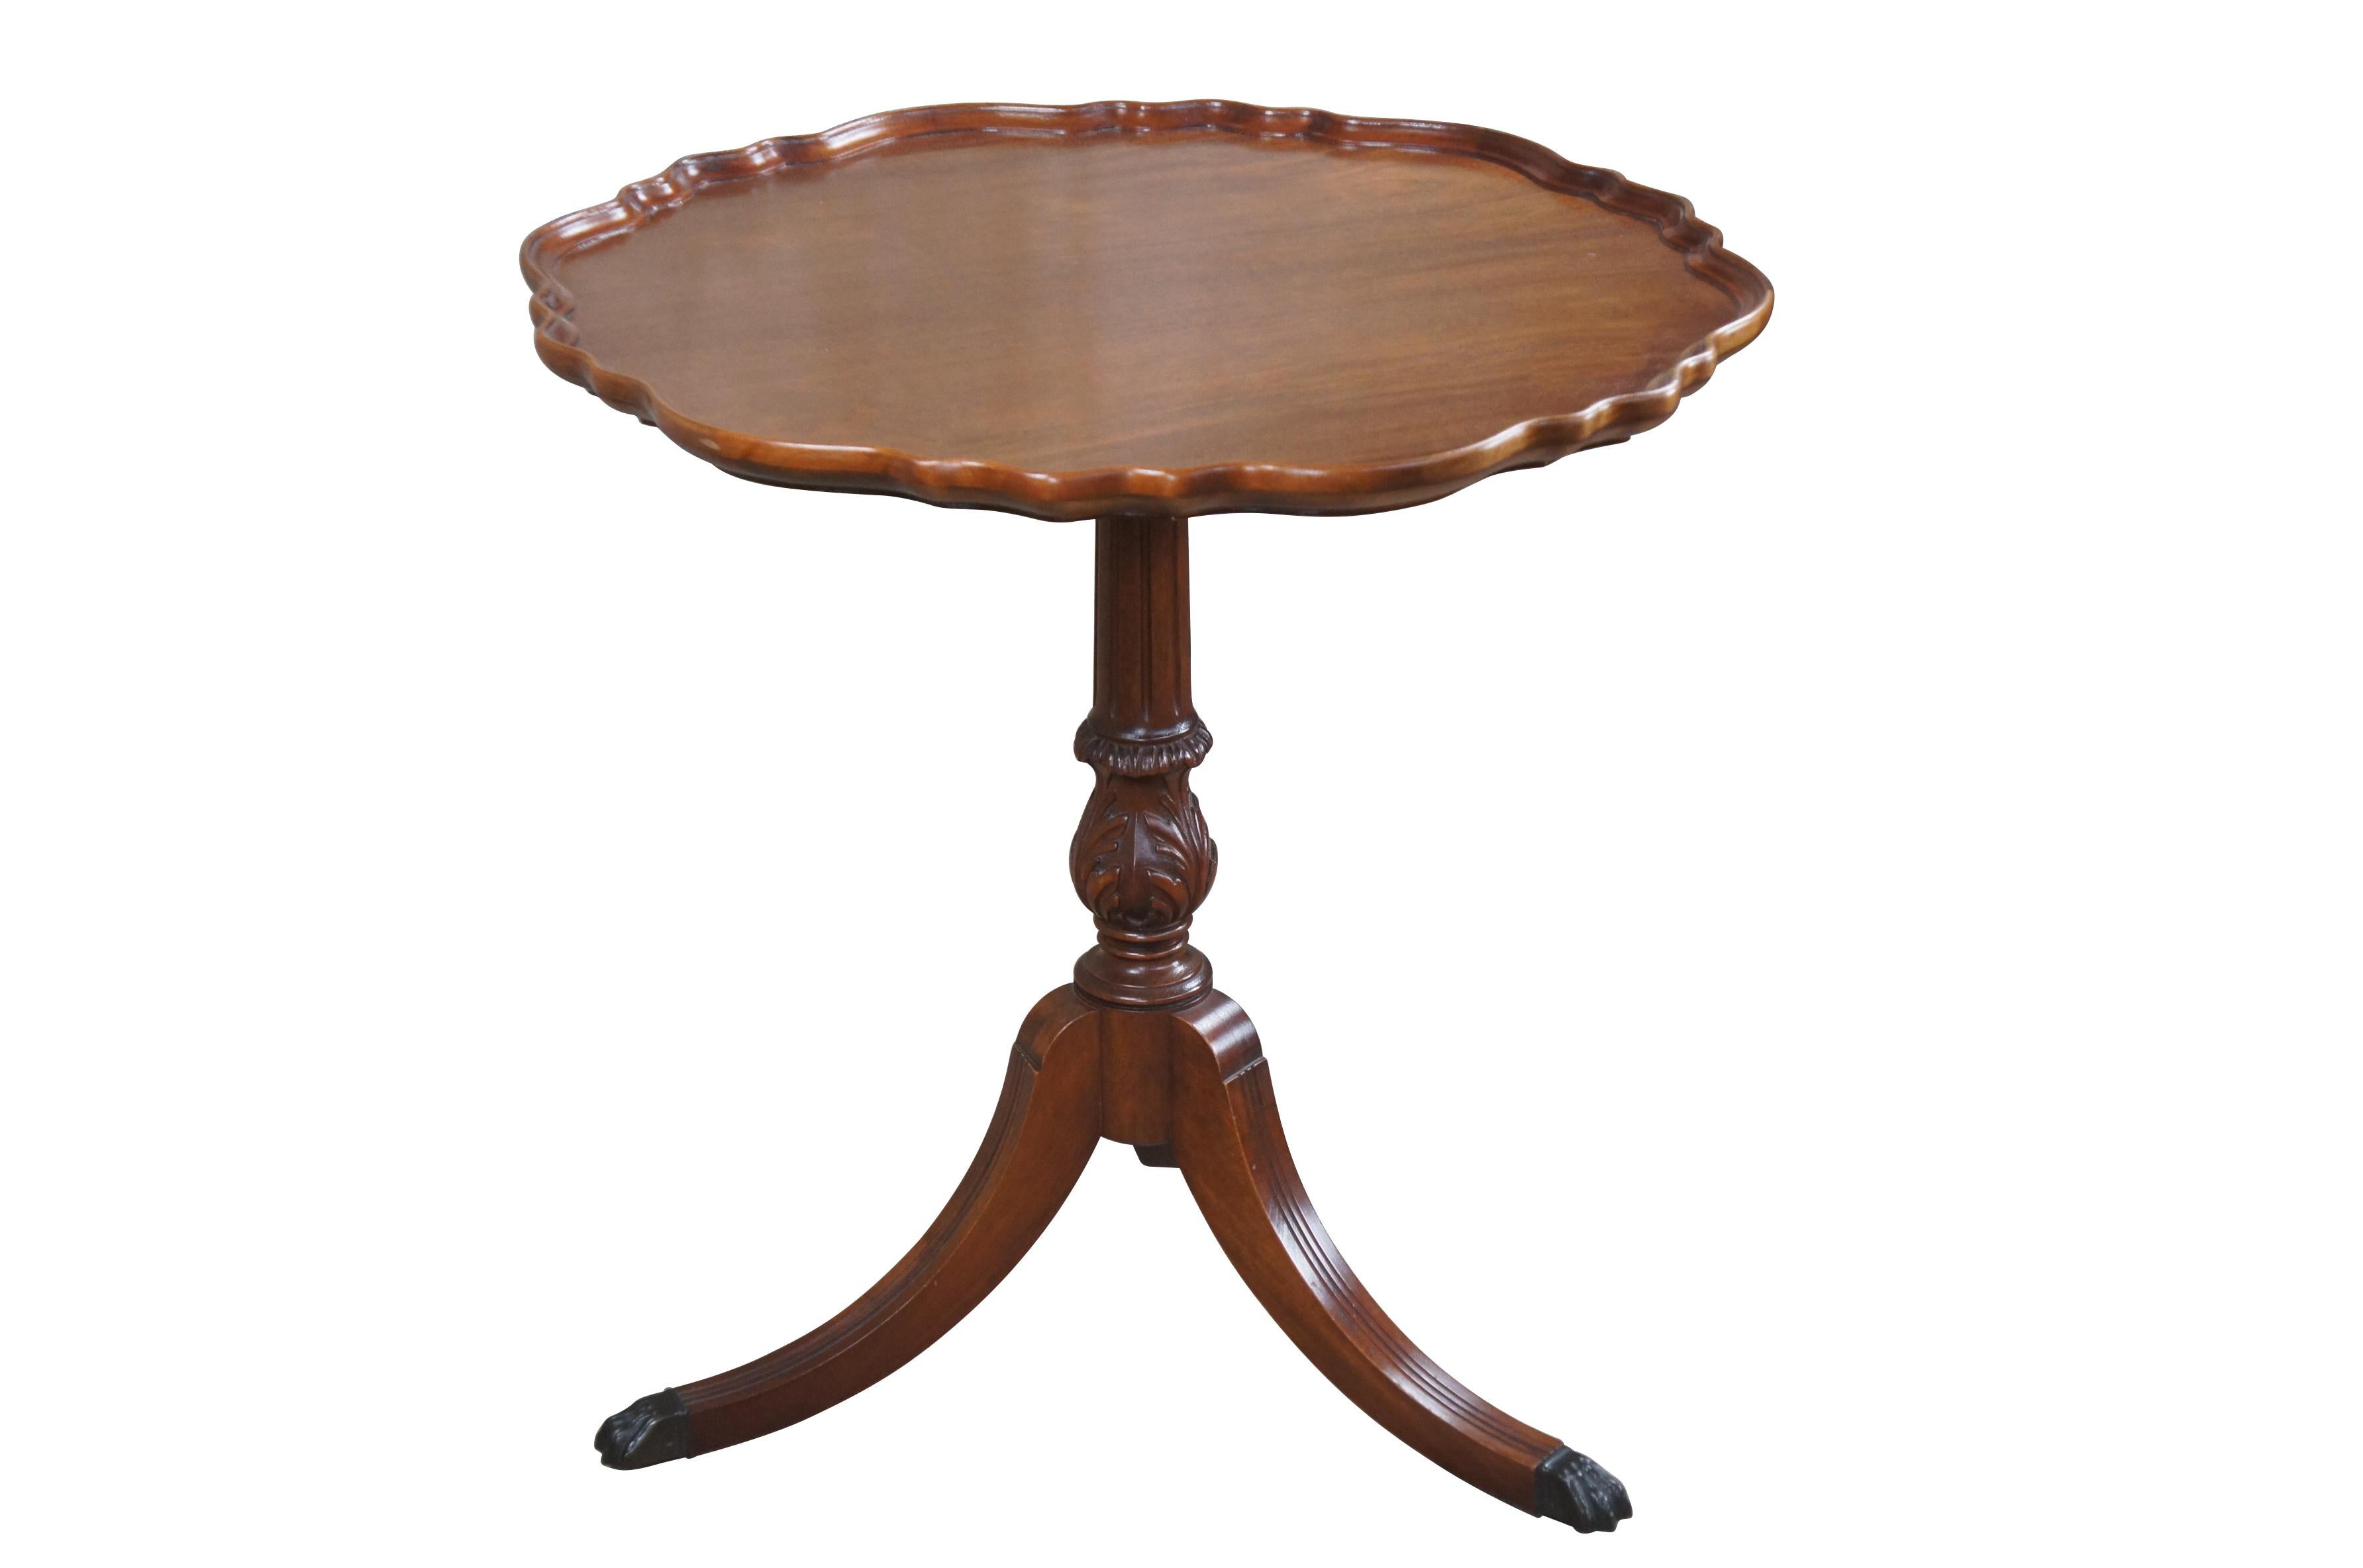 1940s Duncan Phyfe style pie crust table by Imperial Furniture of Grand Rapids. Made from mahogany with an inset scalloped top over a turned and fluted pedestal leading to downswept Duncan Phyfe legs with metal capped paw feet. Marked Imperial Grand